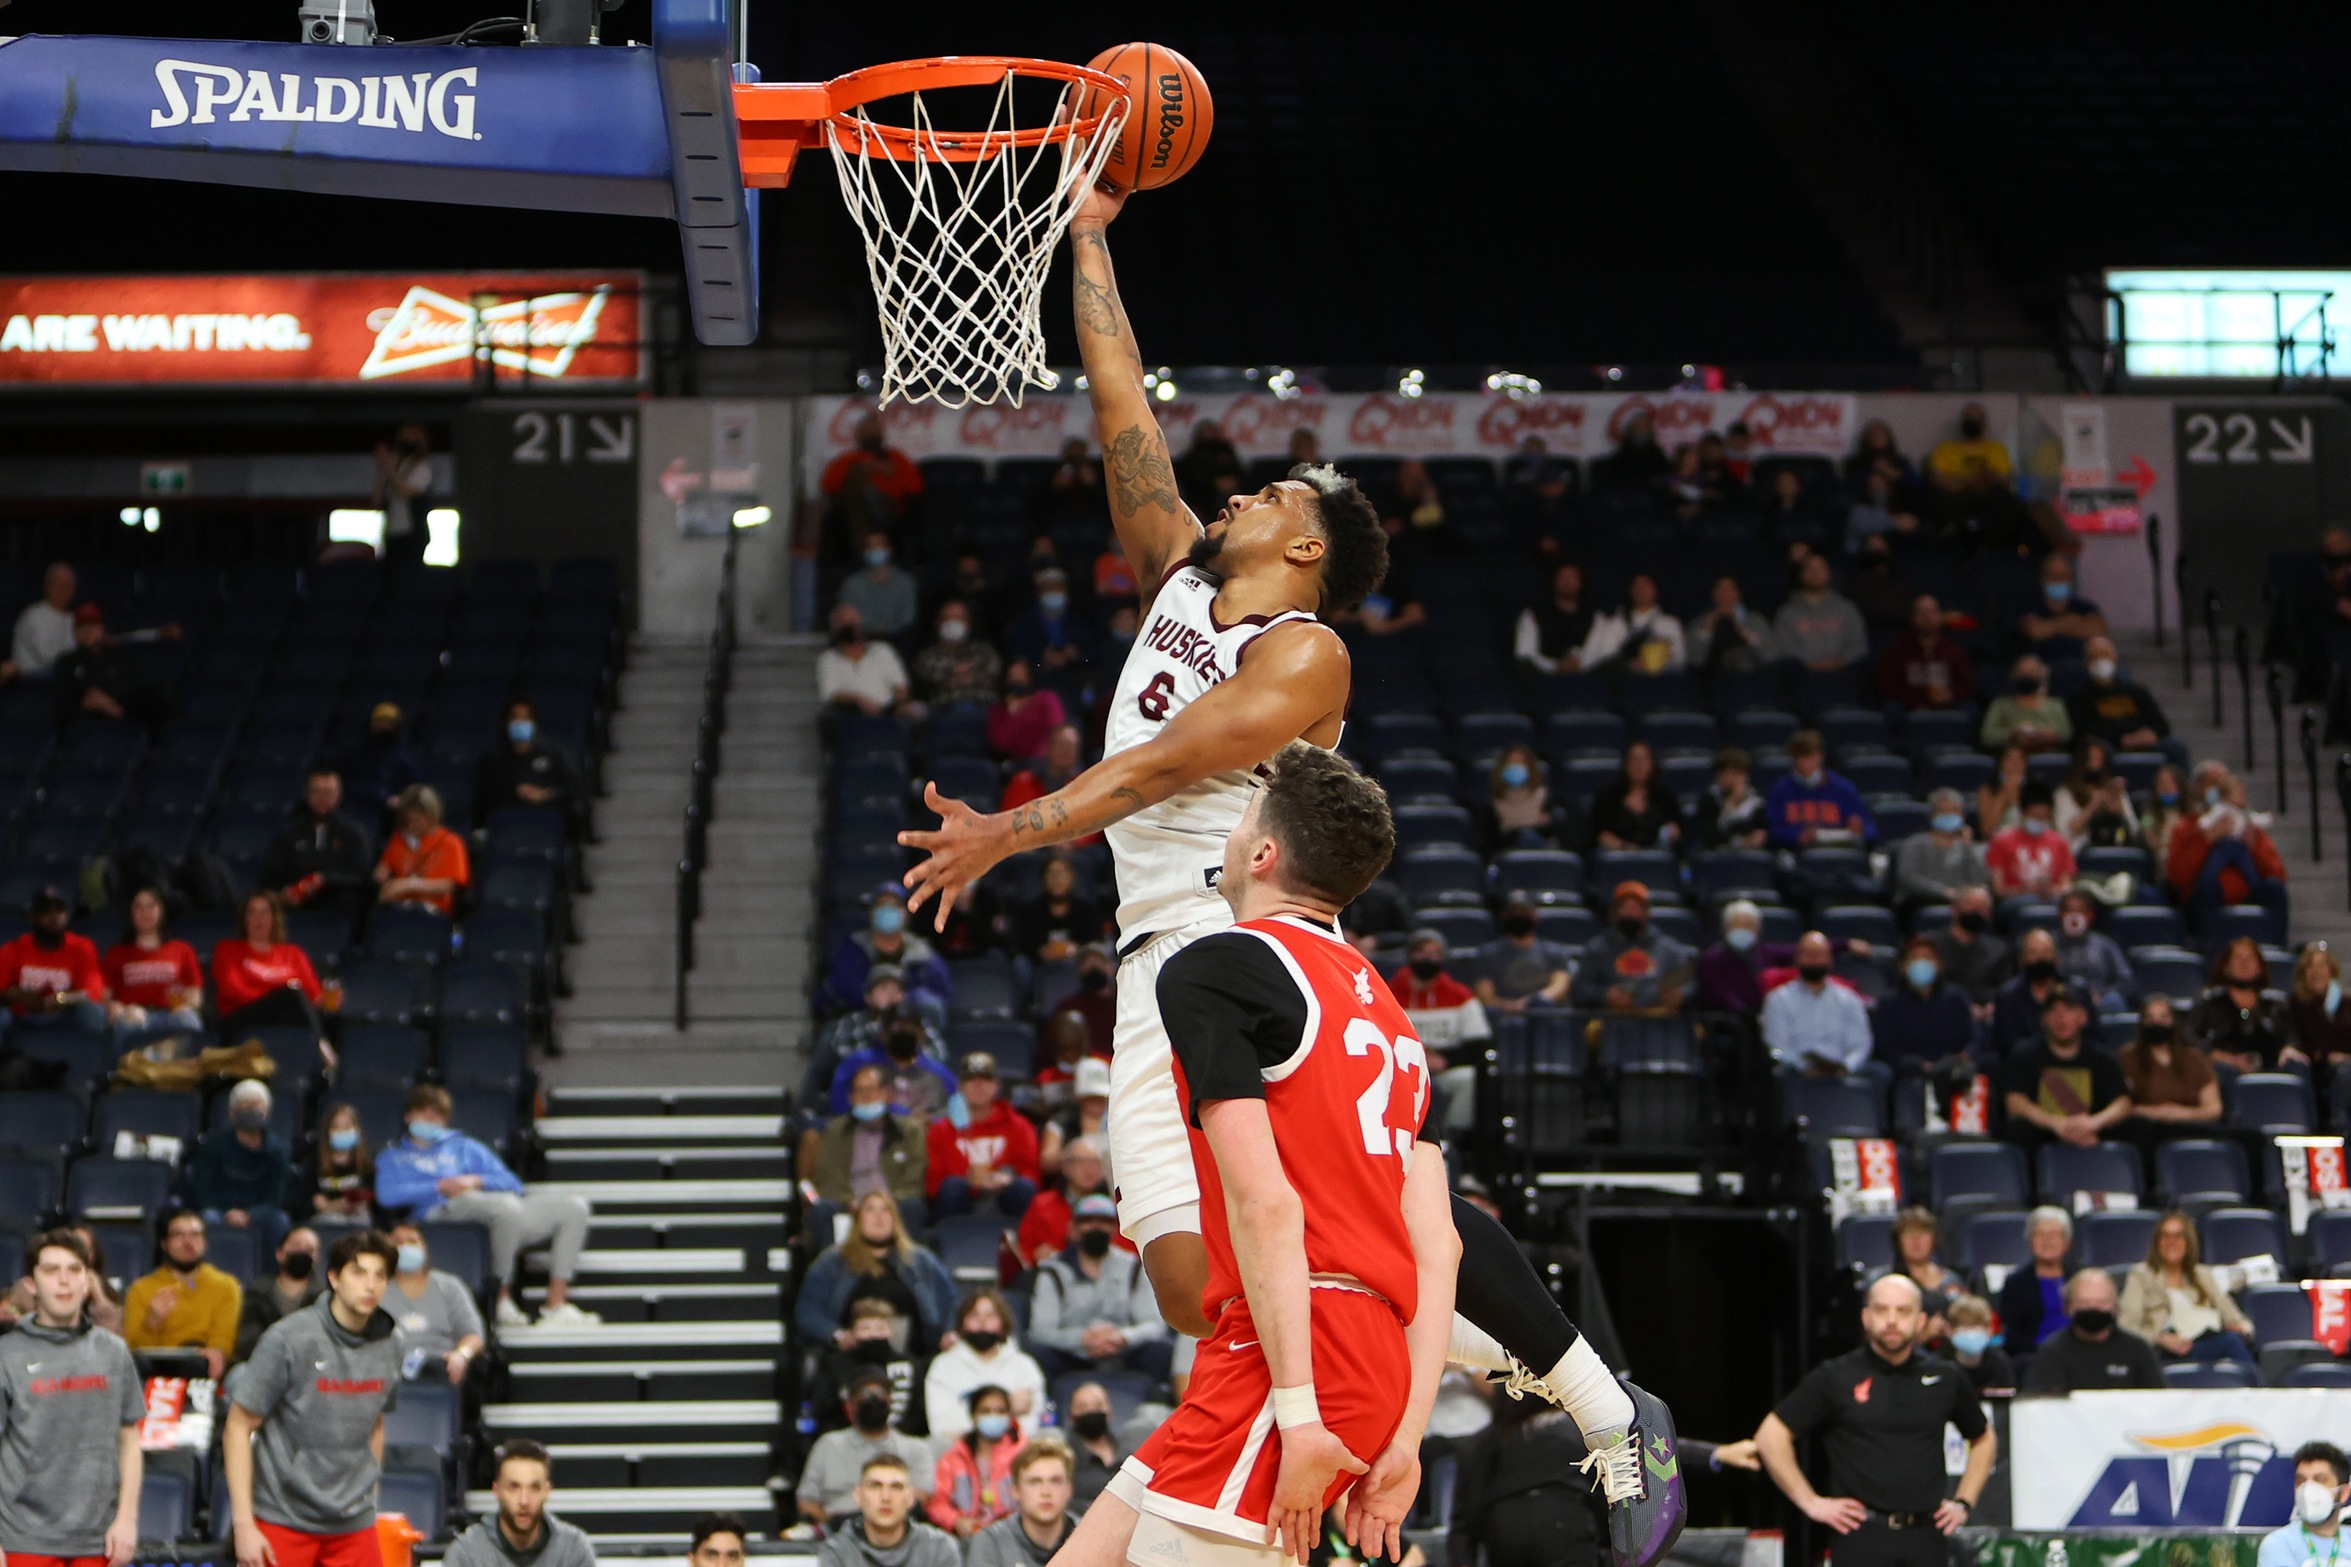 Nikita Kasongo lays up two of his 22 points in the Huskies 95-89 loss to the Memorial Sea-Hawks in the AUS Quarterfinal on March 18, 2022. (Photo by Nick Pearce / Atlantic University Sport)